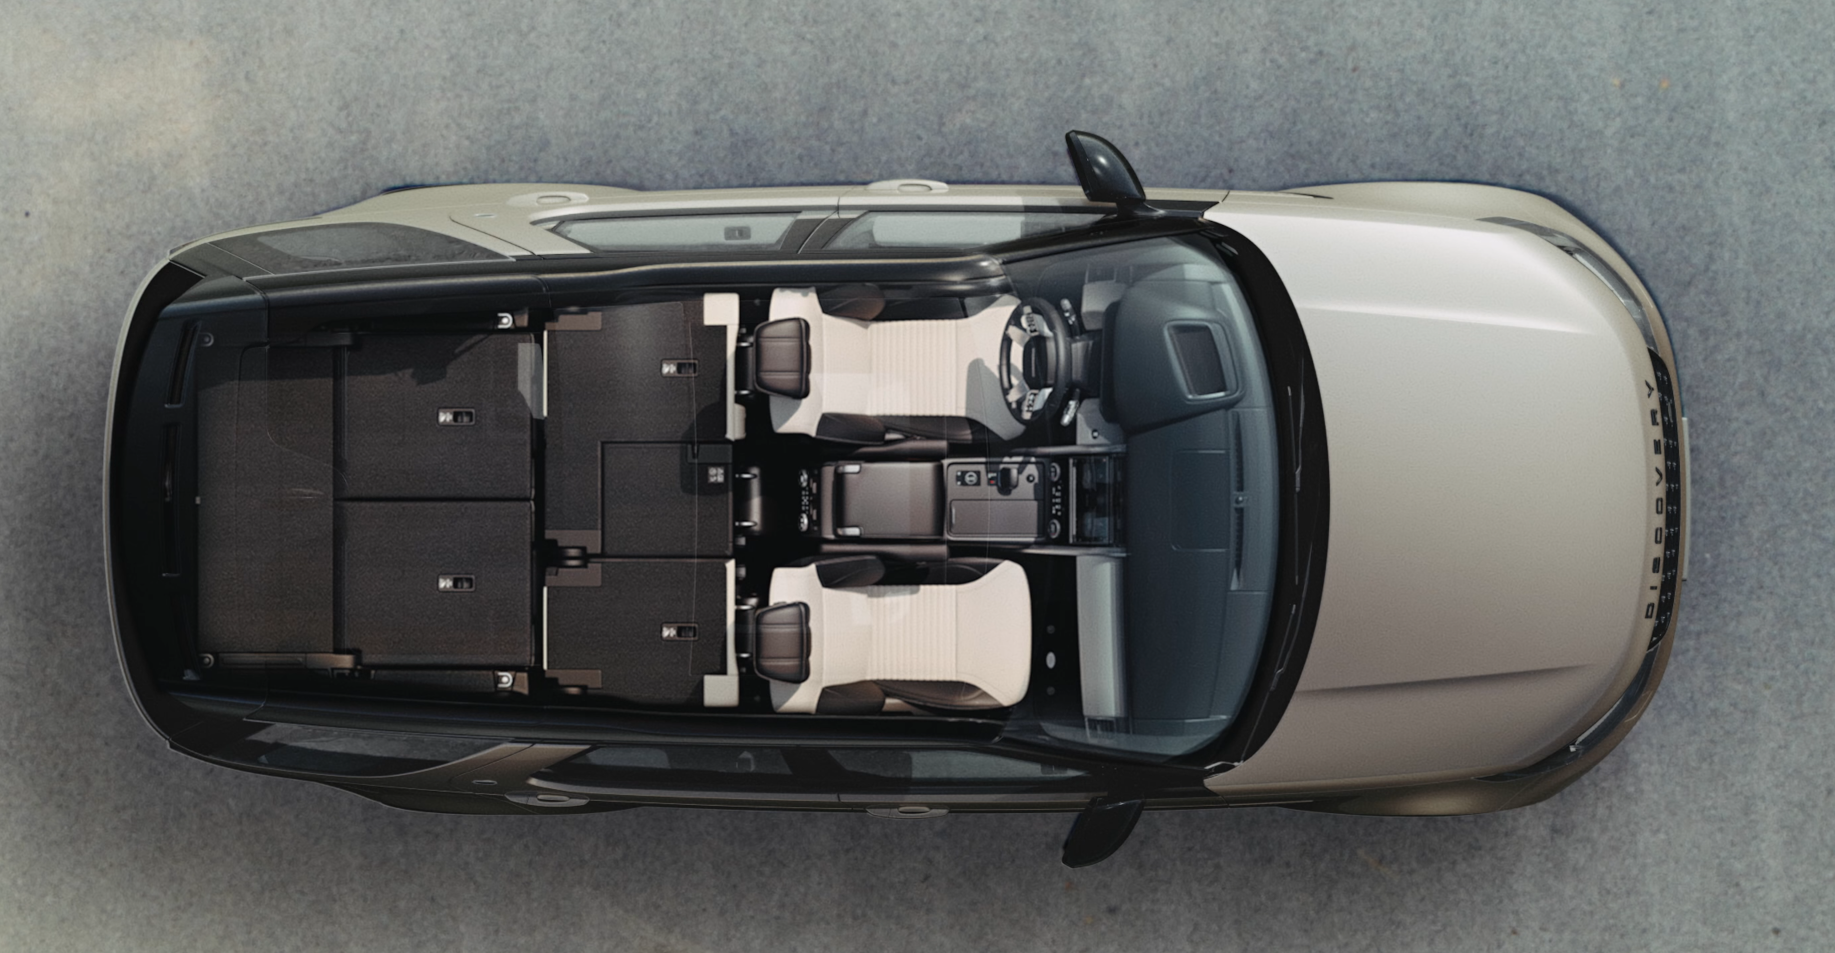 Land Rover Discovery Storage Space